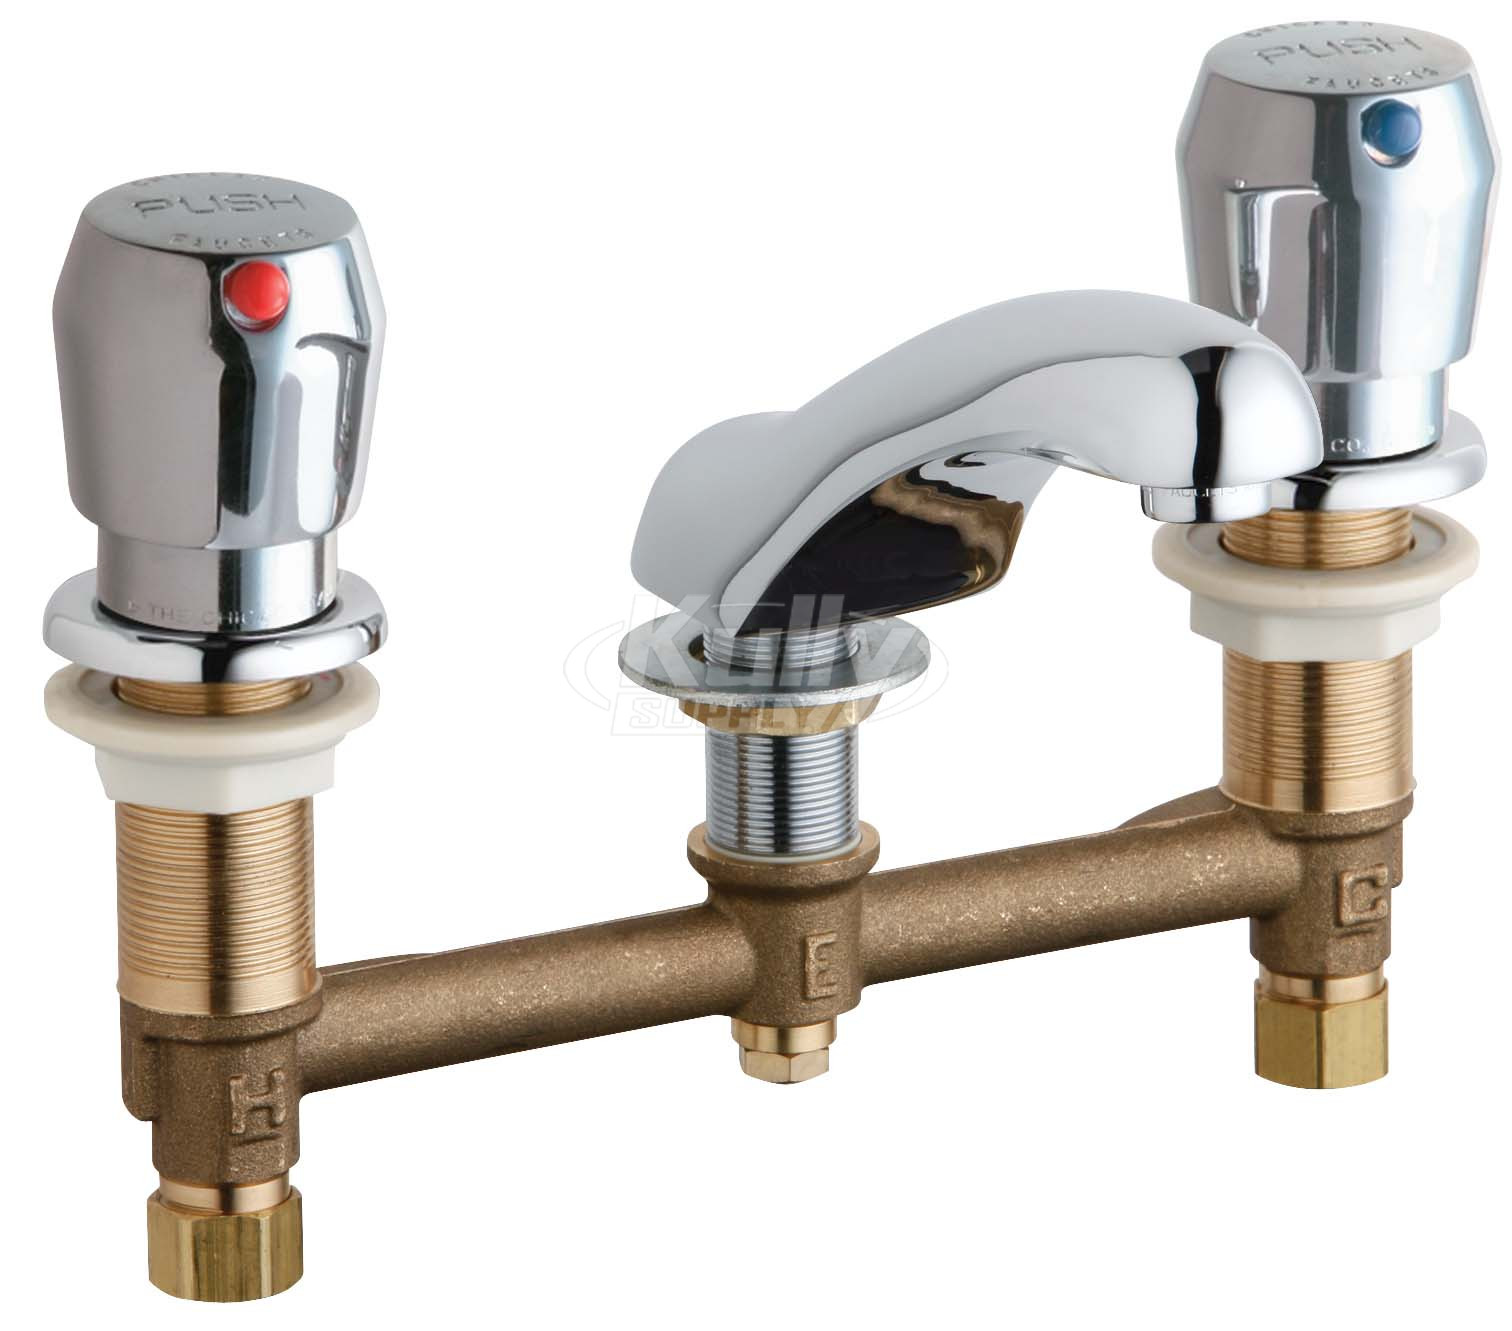 Chicago 404-665ABCP E-Cast Concealed Lavatory Metering Faucet